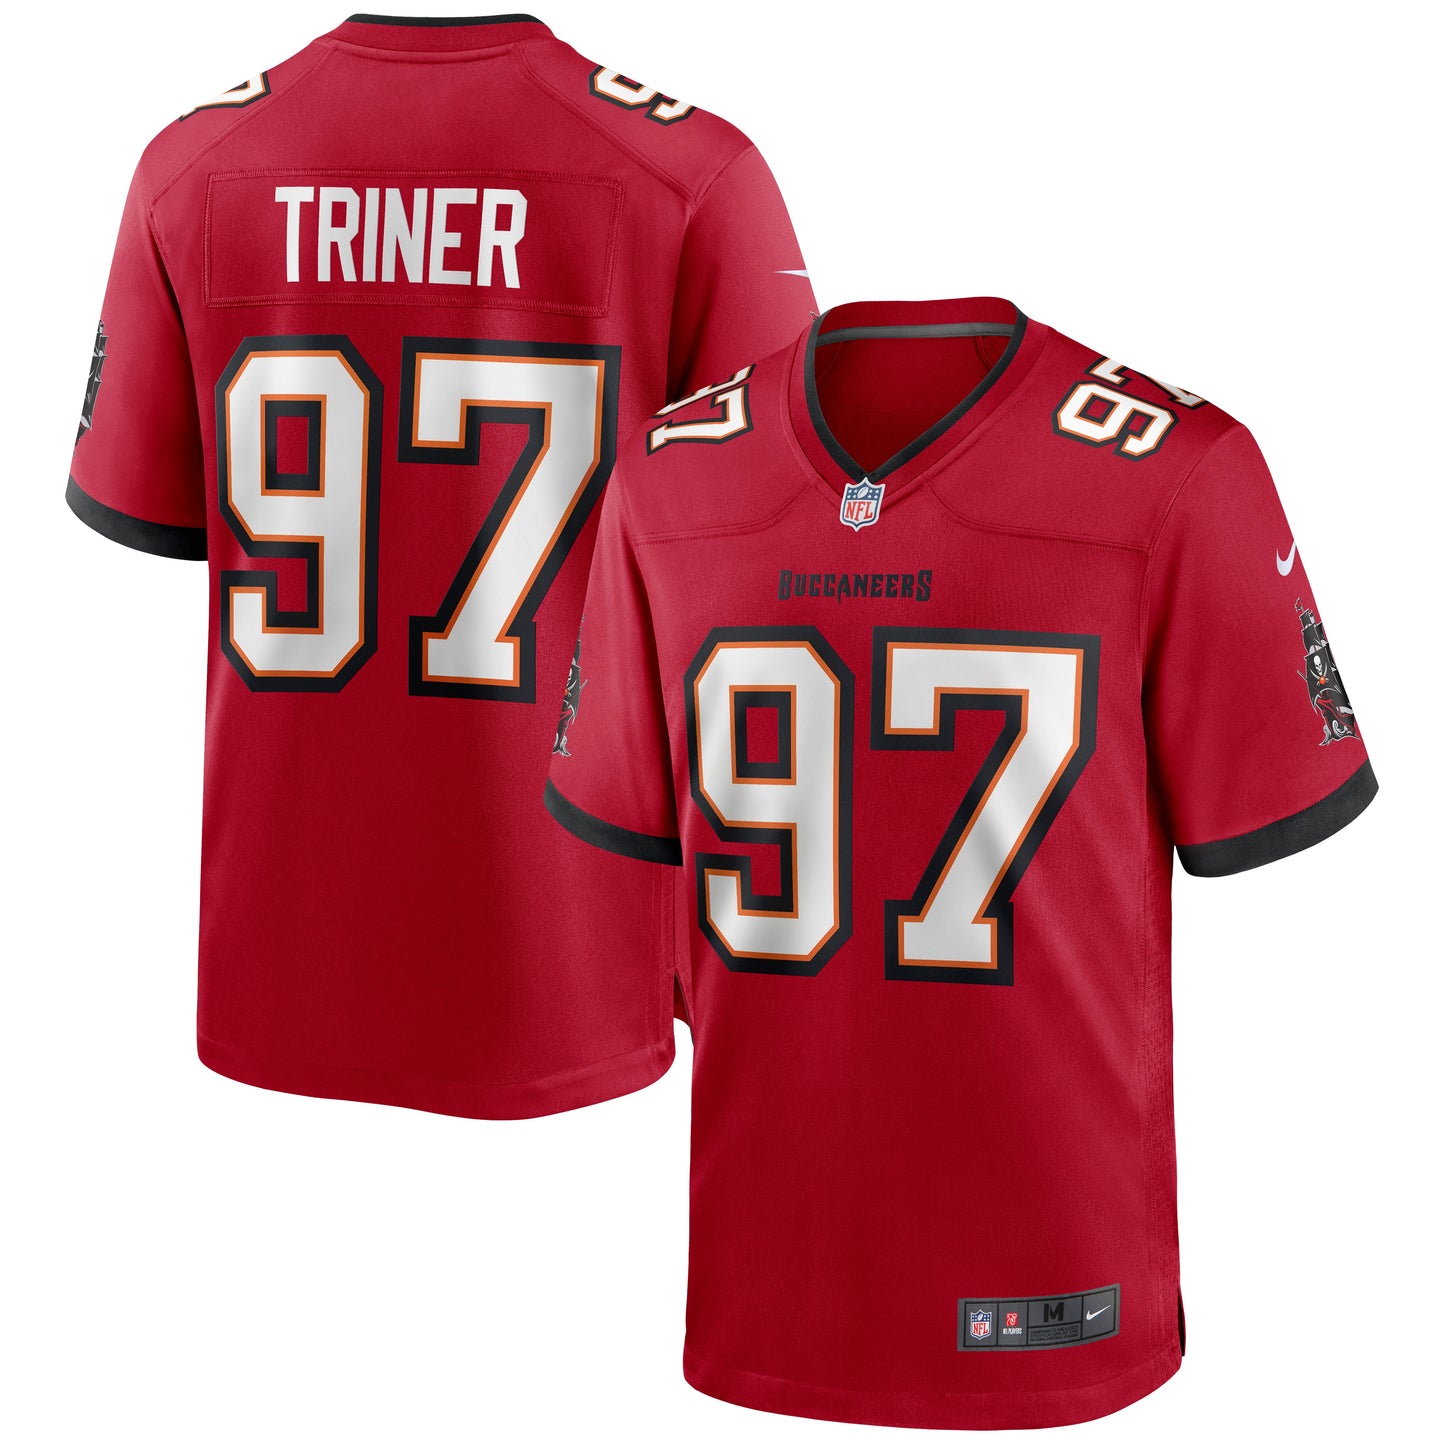 Zach Triner Tampa Bay Buccaneers Nike Game Jersey - Red